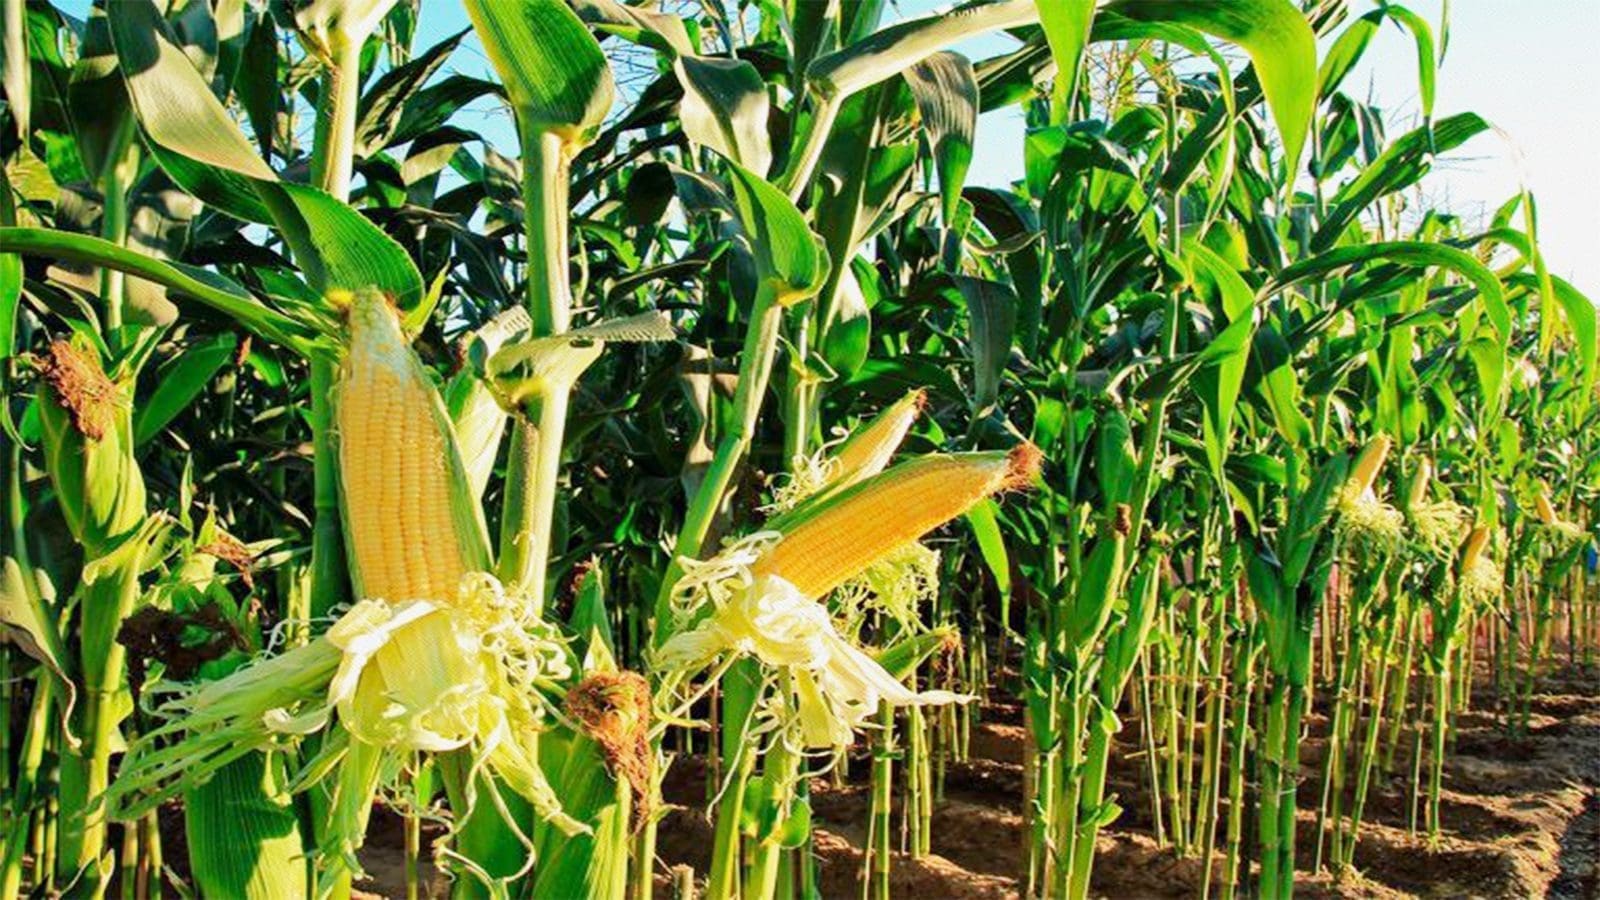 Nigeria to commence national performance trials for genetically modified maize